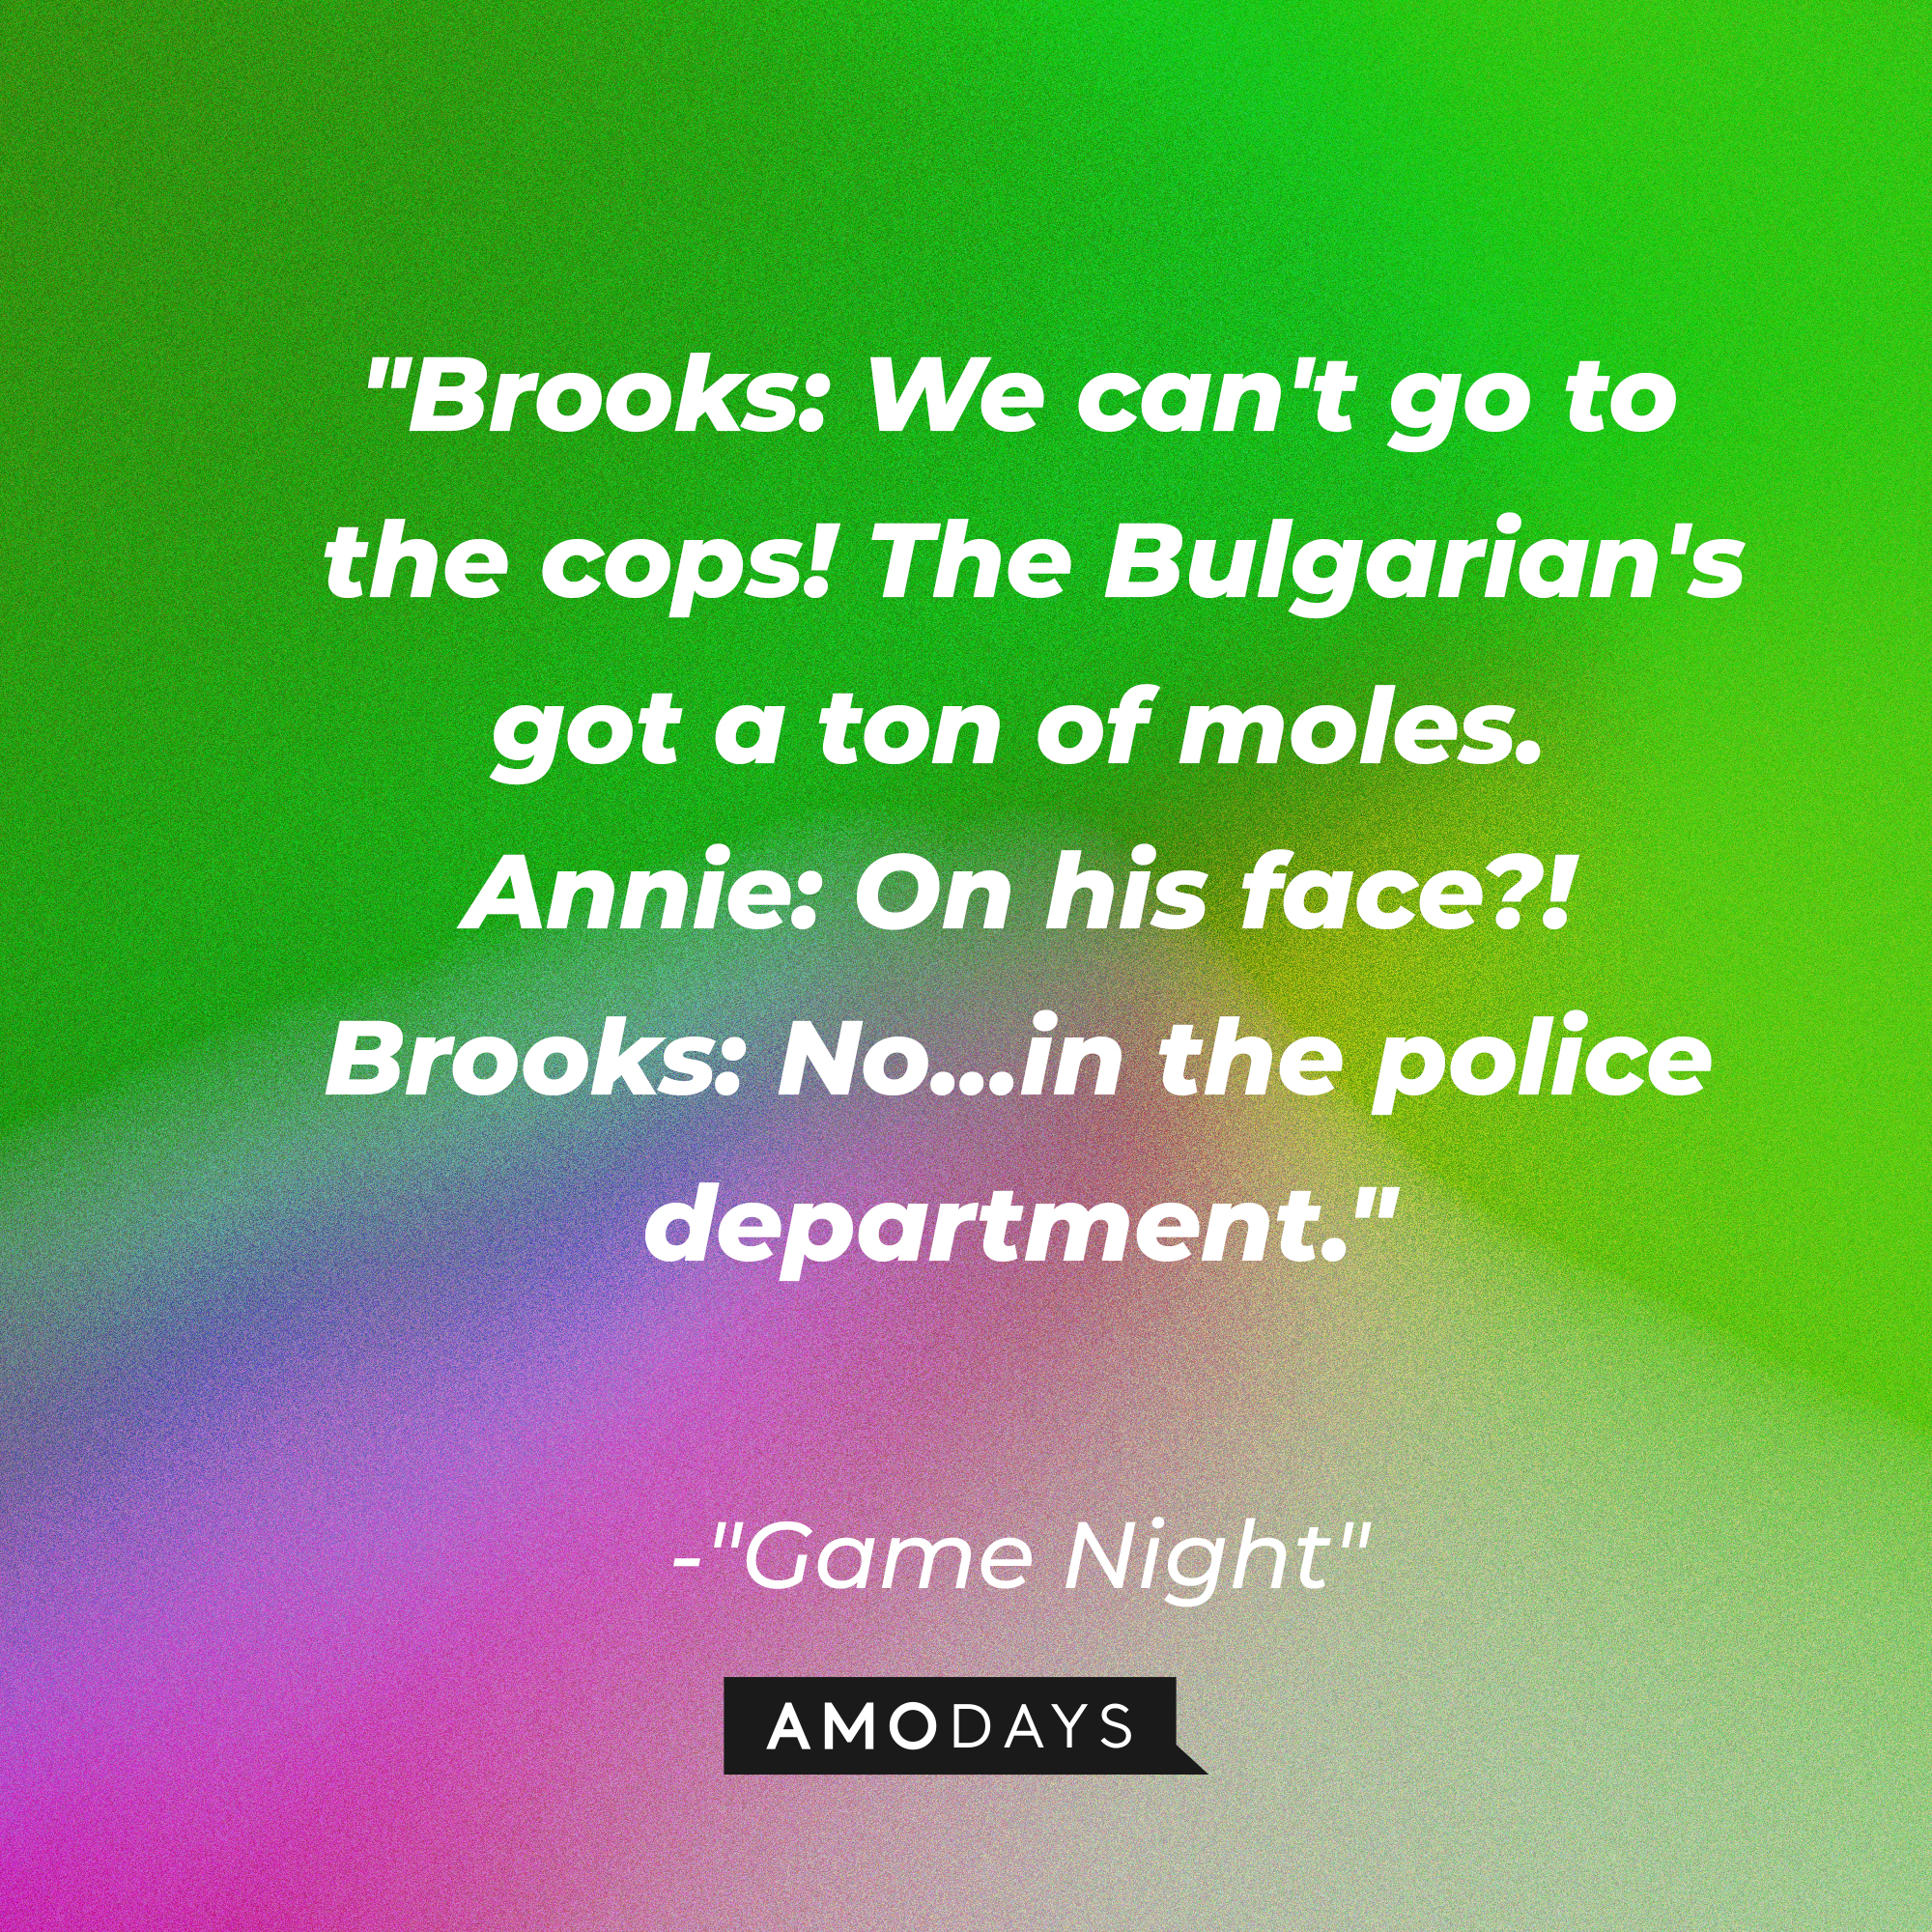 Quote from “Game Night”: “Brooks: We can't go to the cops! The Bulgarian's got a ton of moles. Annie: On his face?! Brooks: No...in the police department.” | Source: AmoDays